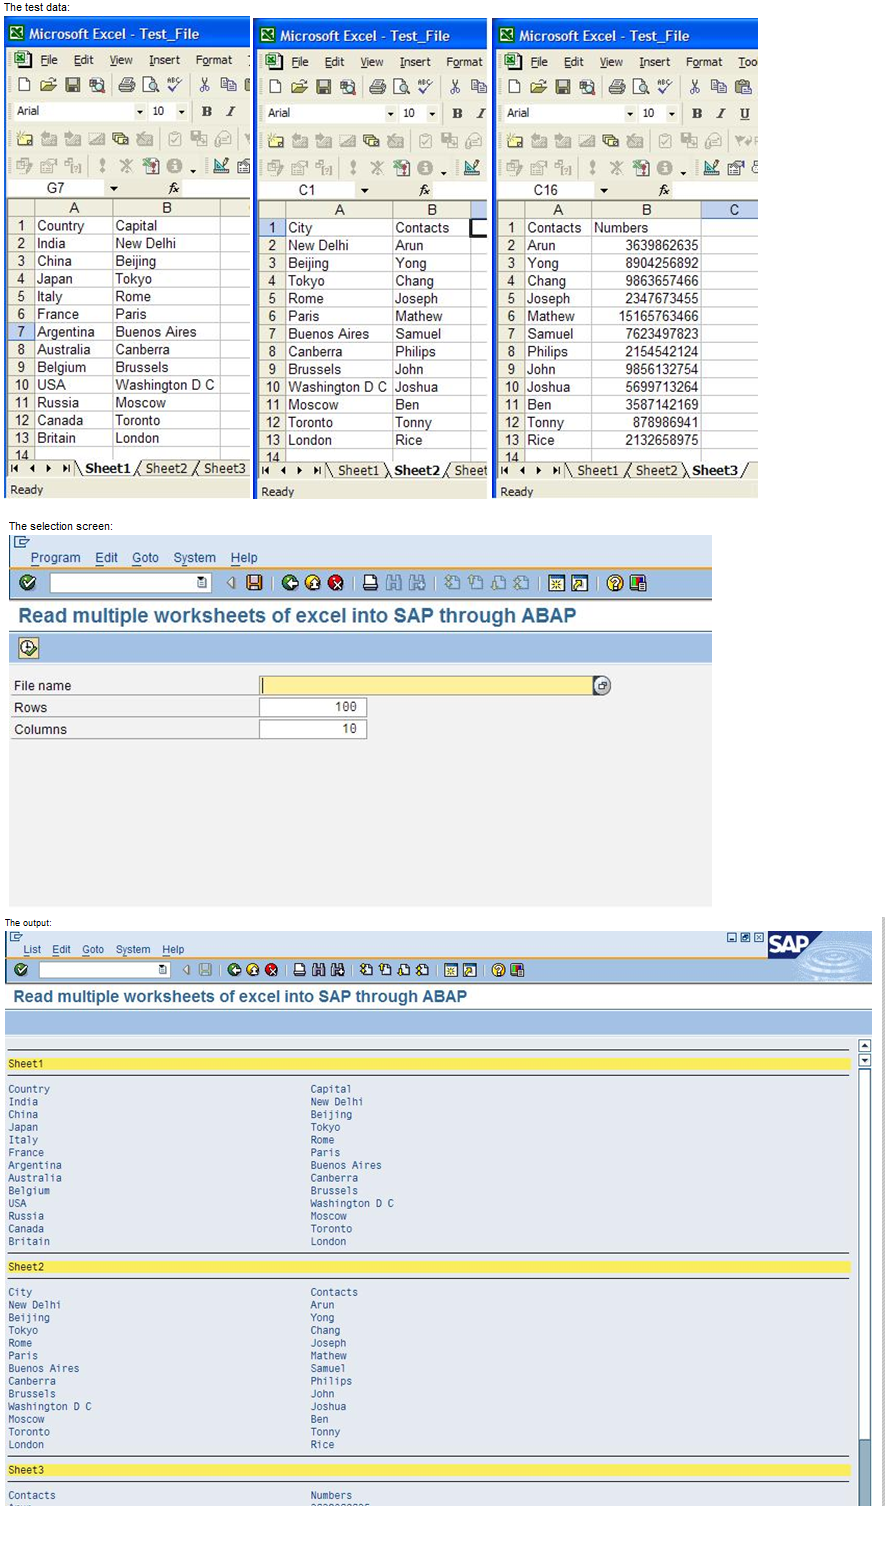 bharatkumar-manchikanti-read-multiple-sheets-of-an-excel-file-into-sap